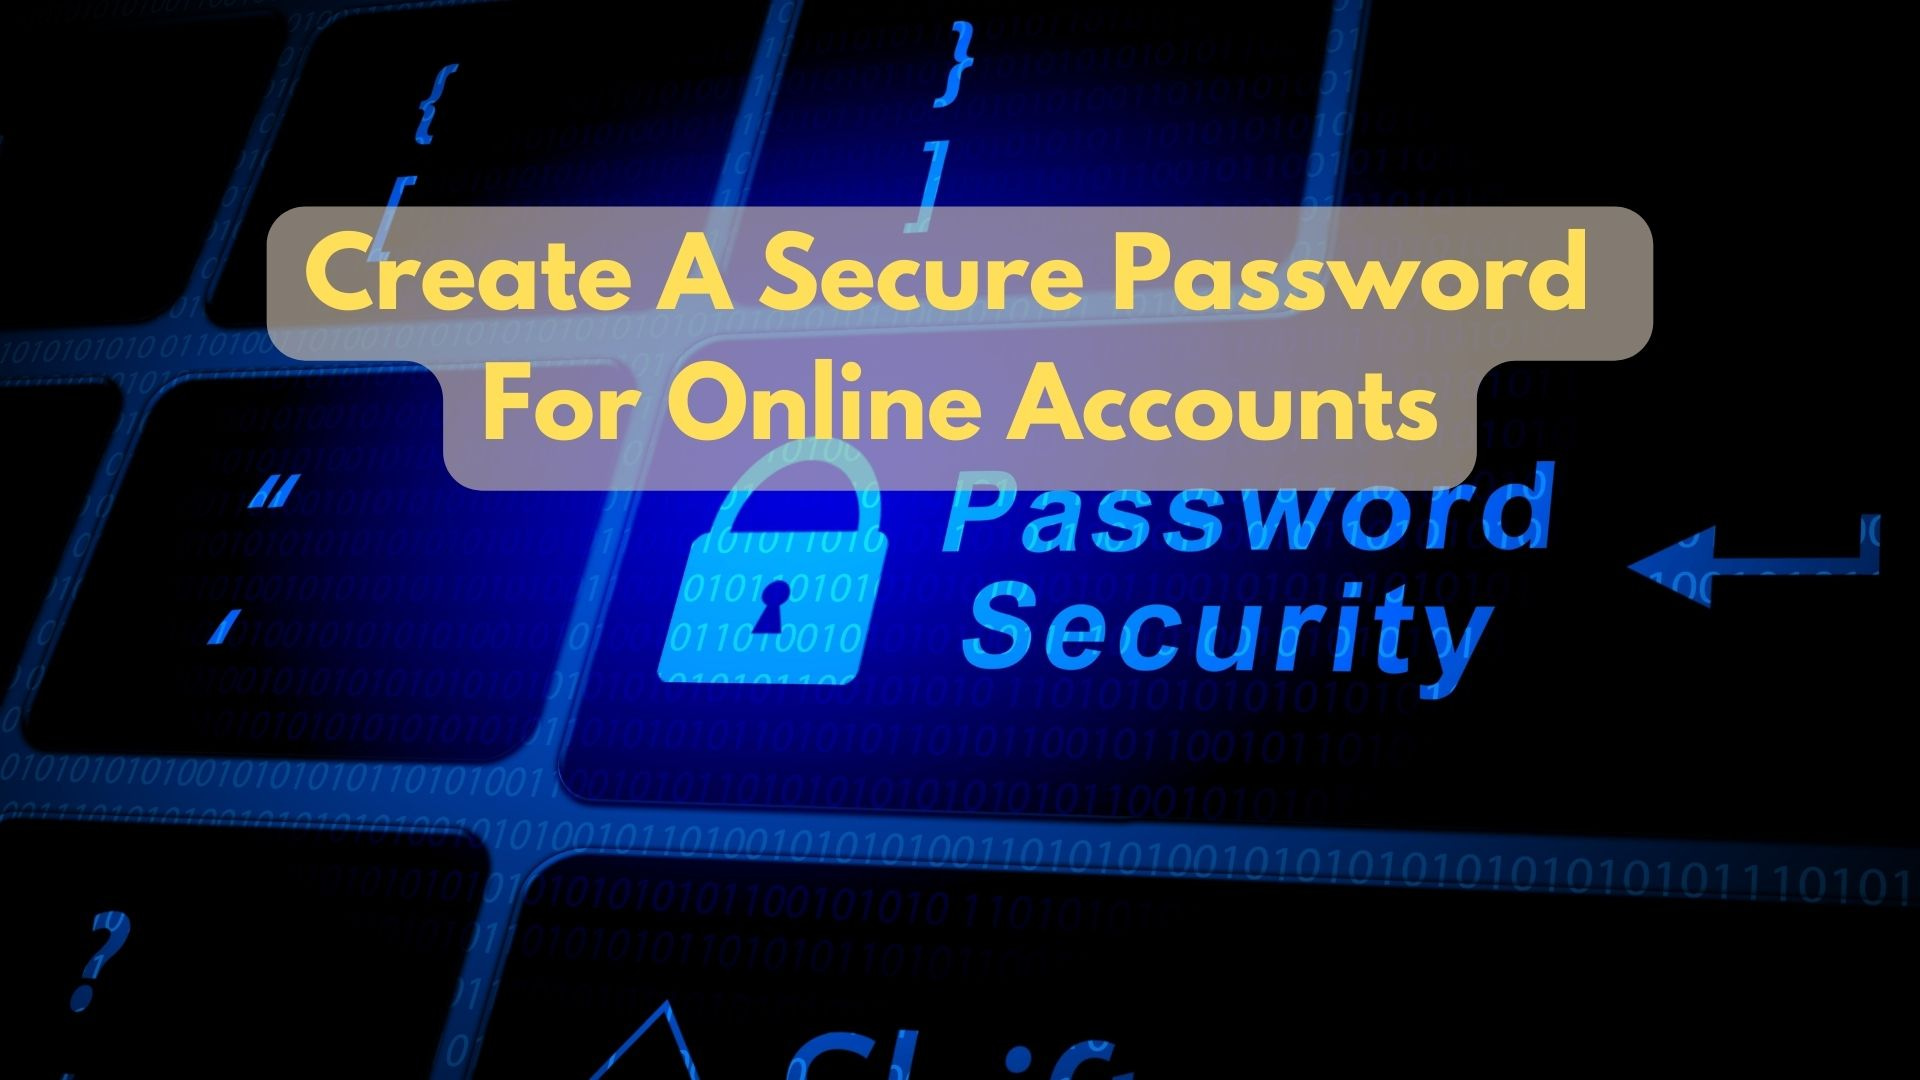 How To Create A Secure Password For Online Accounts?